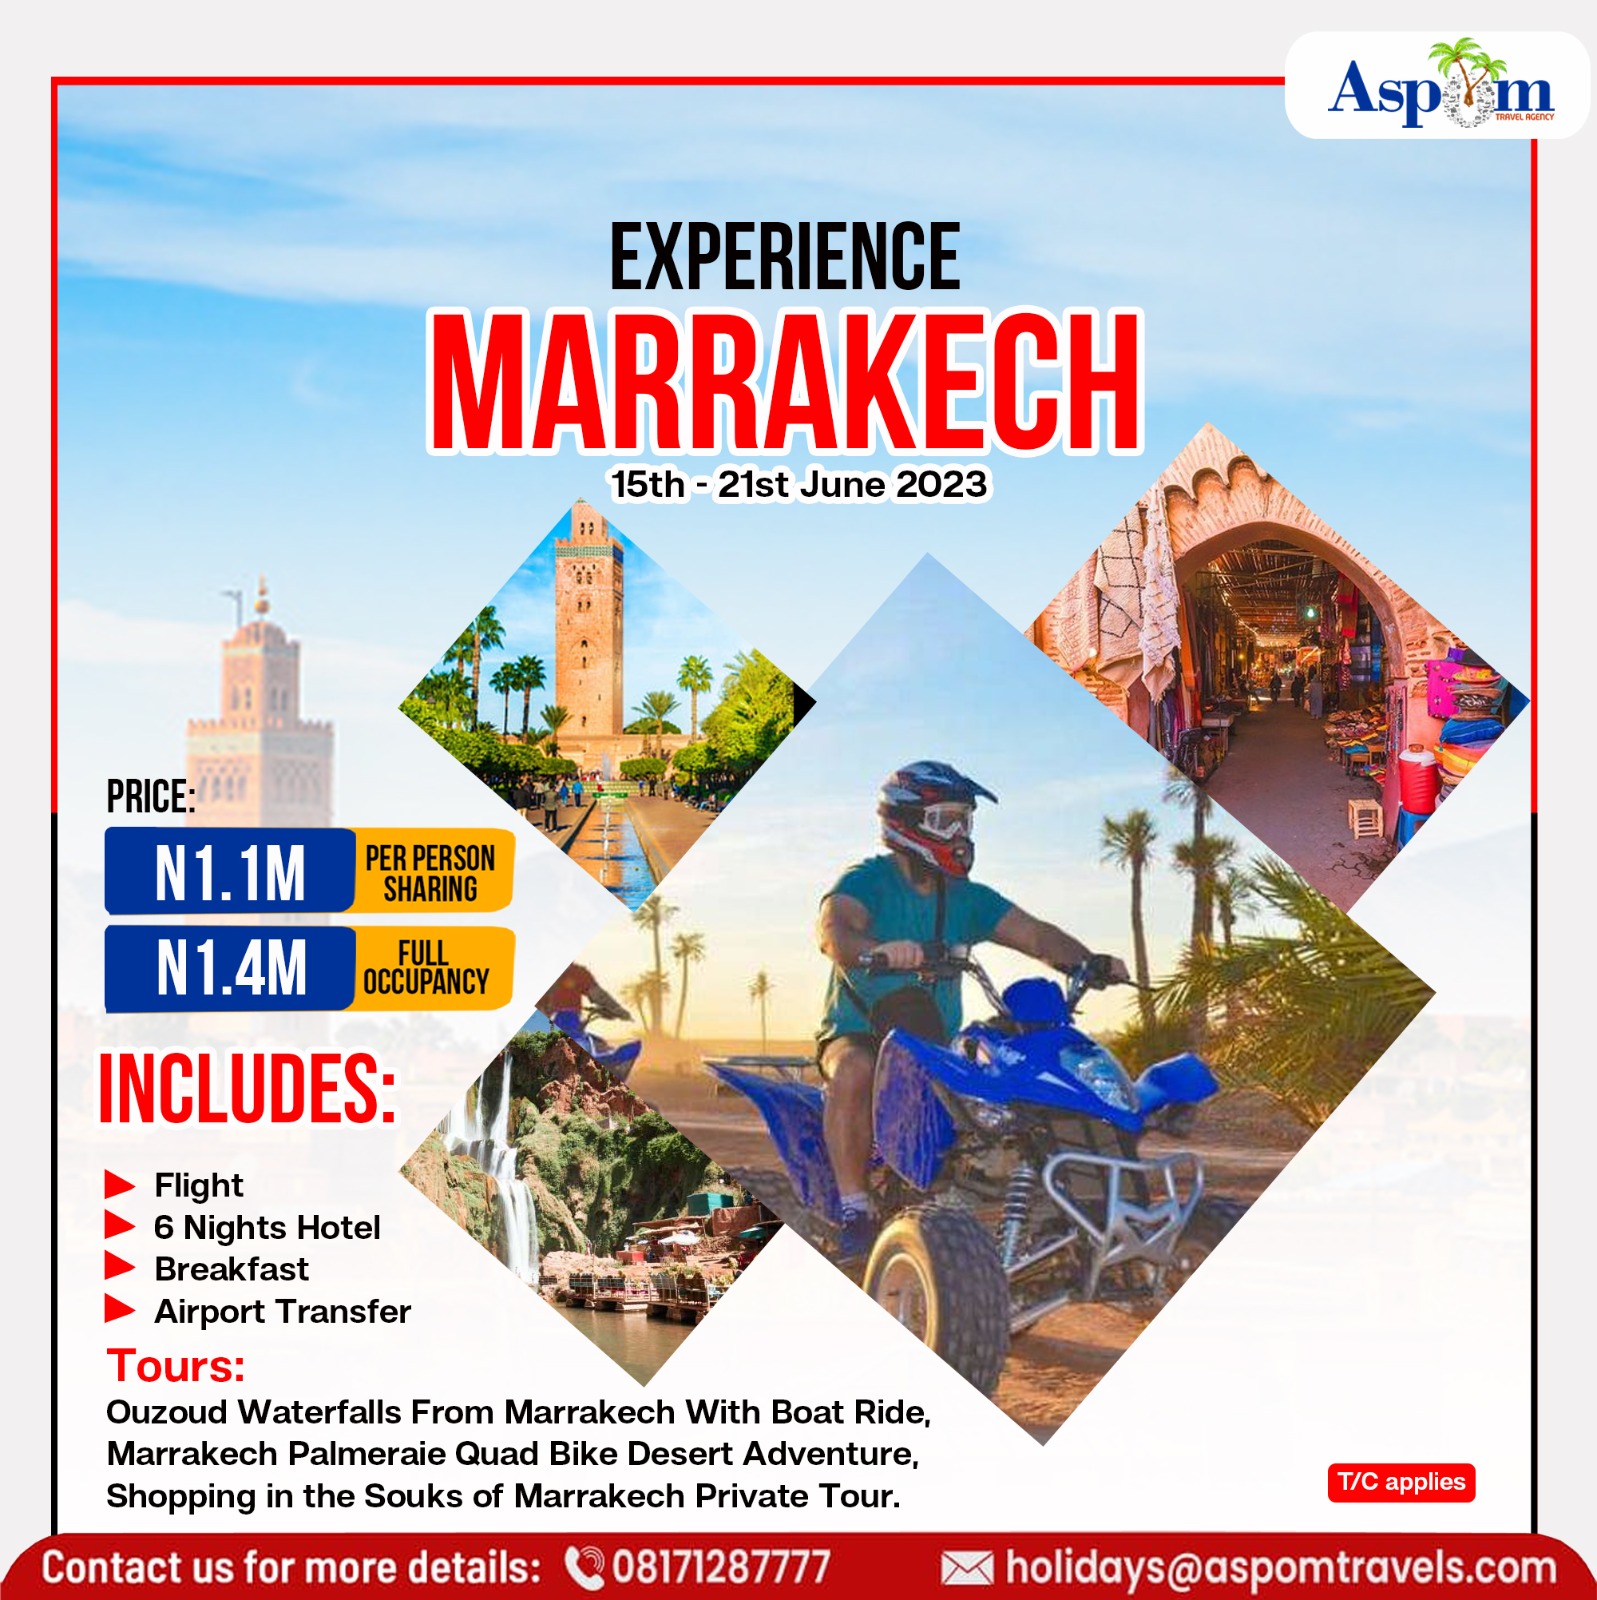 EXPERIENCE MARRAKECH JUNE 15TH